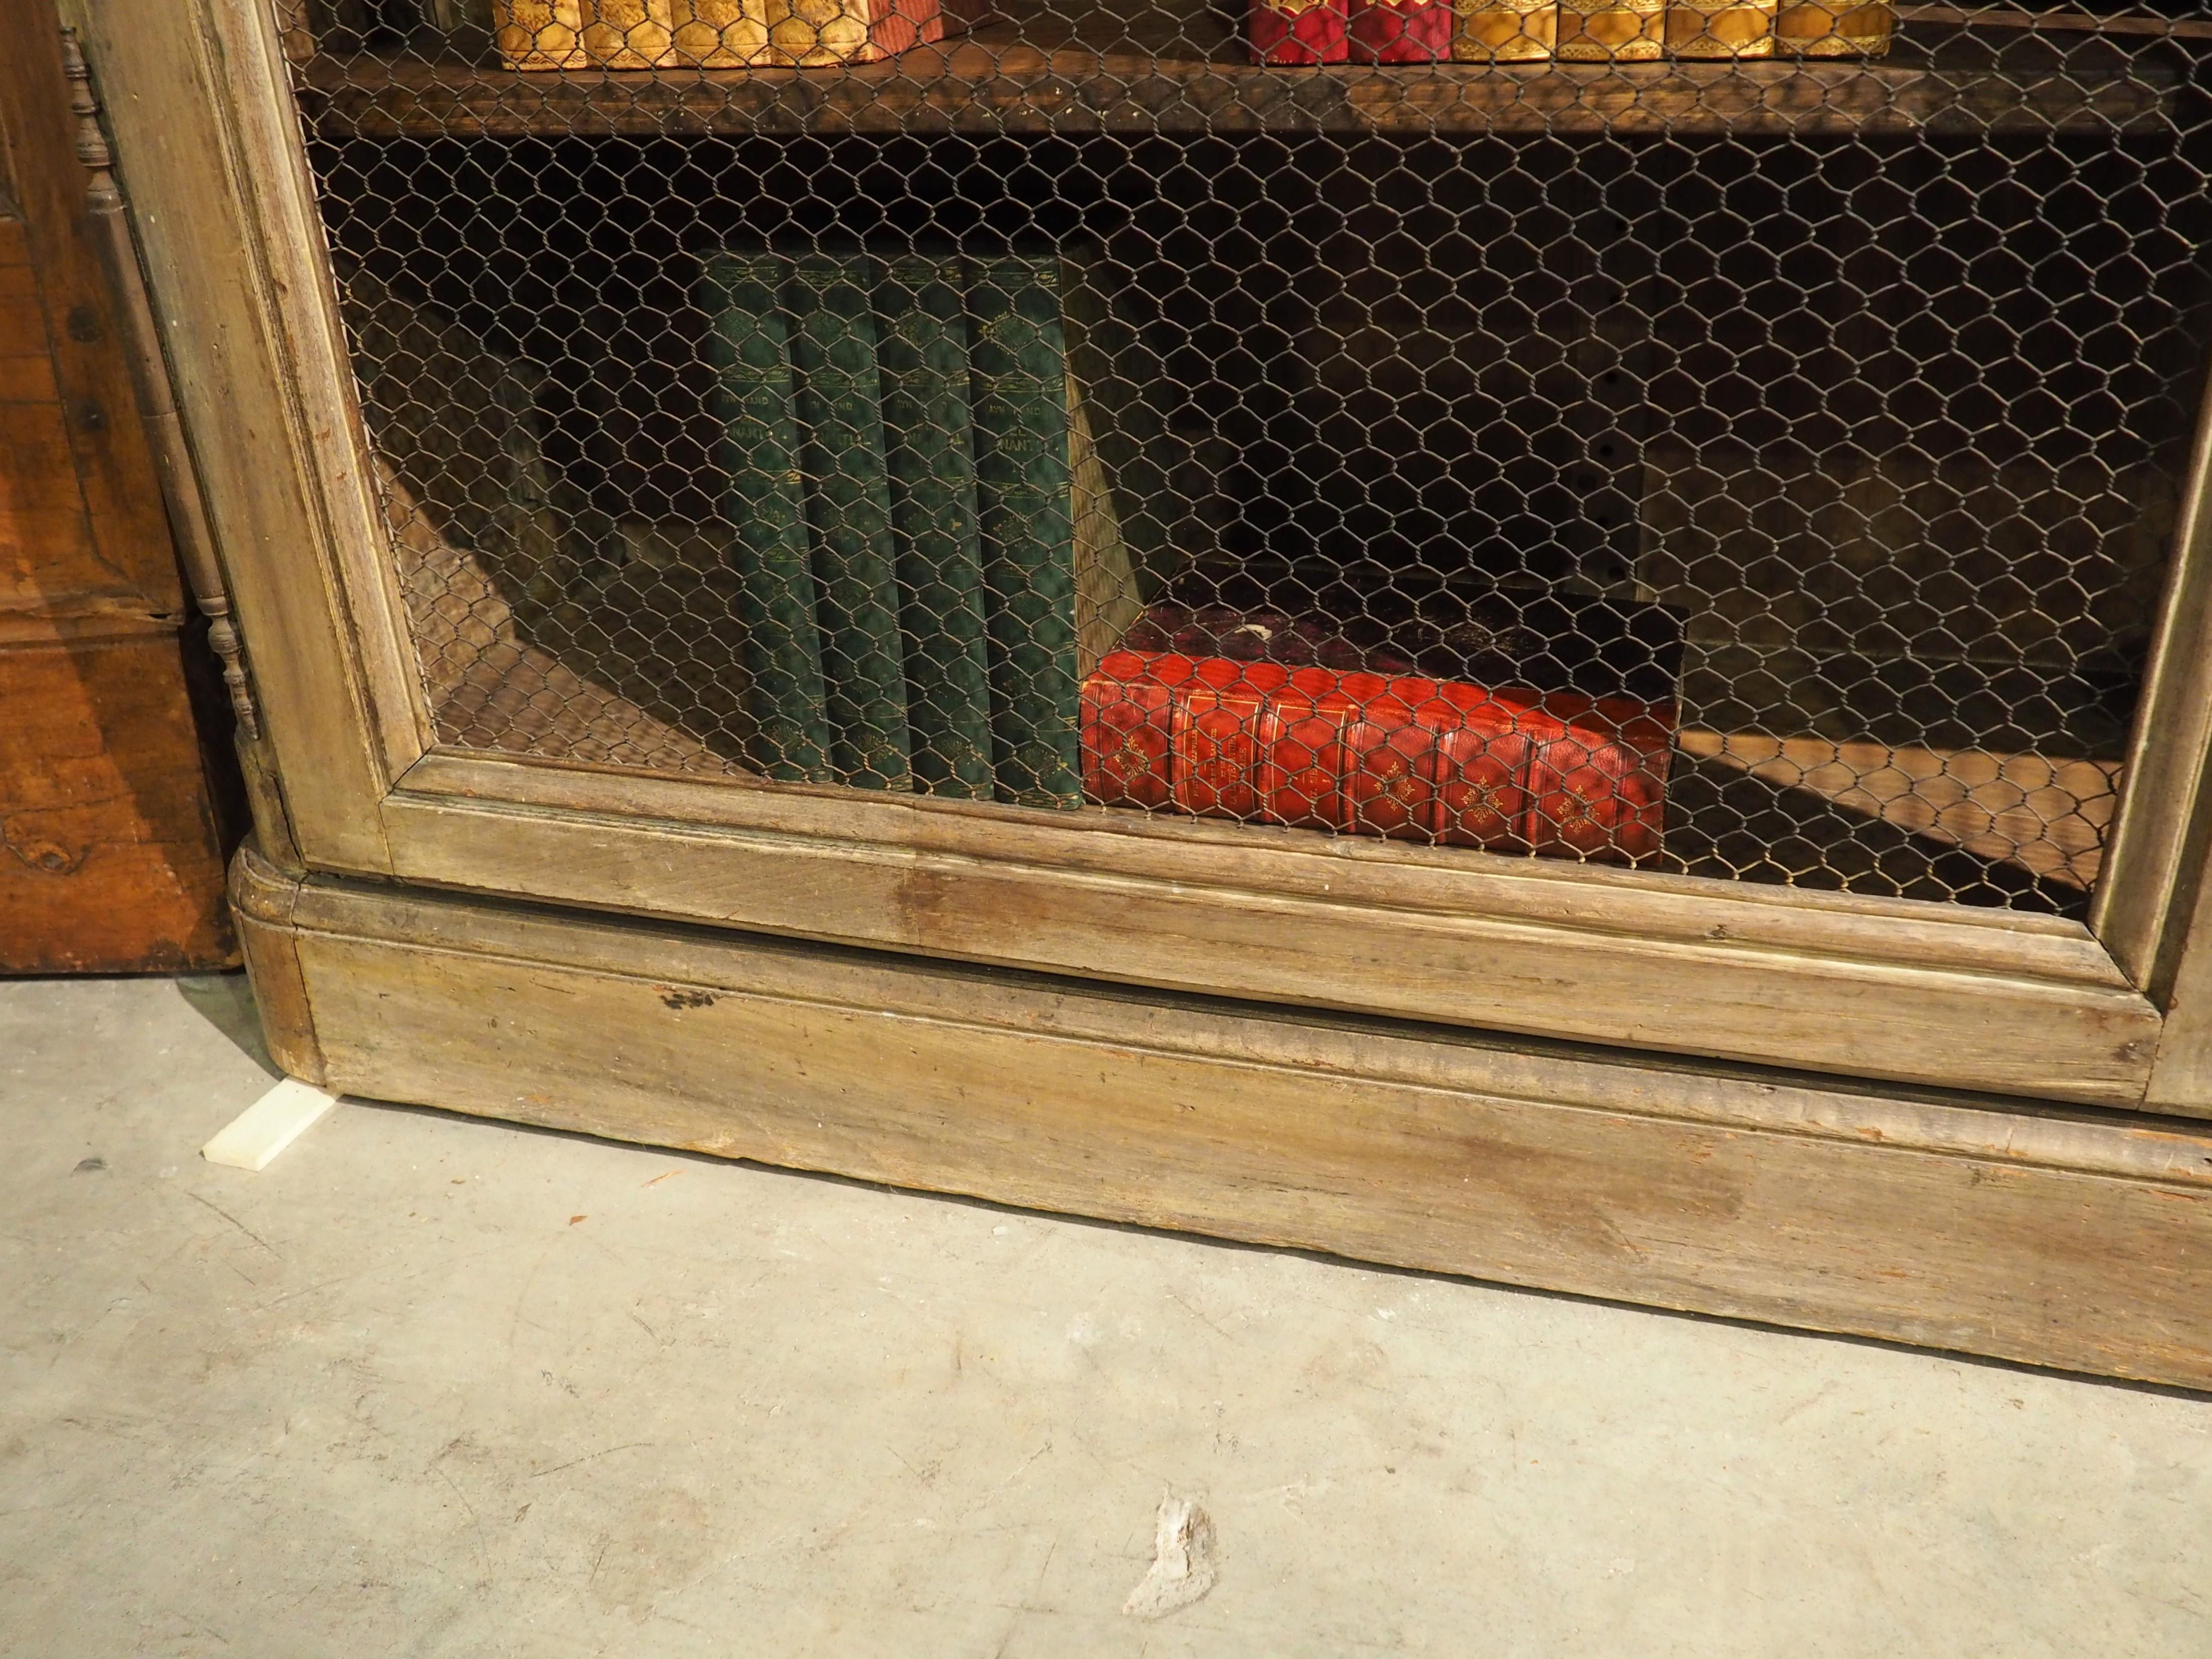 Metal Early 19th Century French Bibliotheque Cabinet with Wire Mesh Door Panels